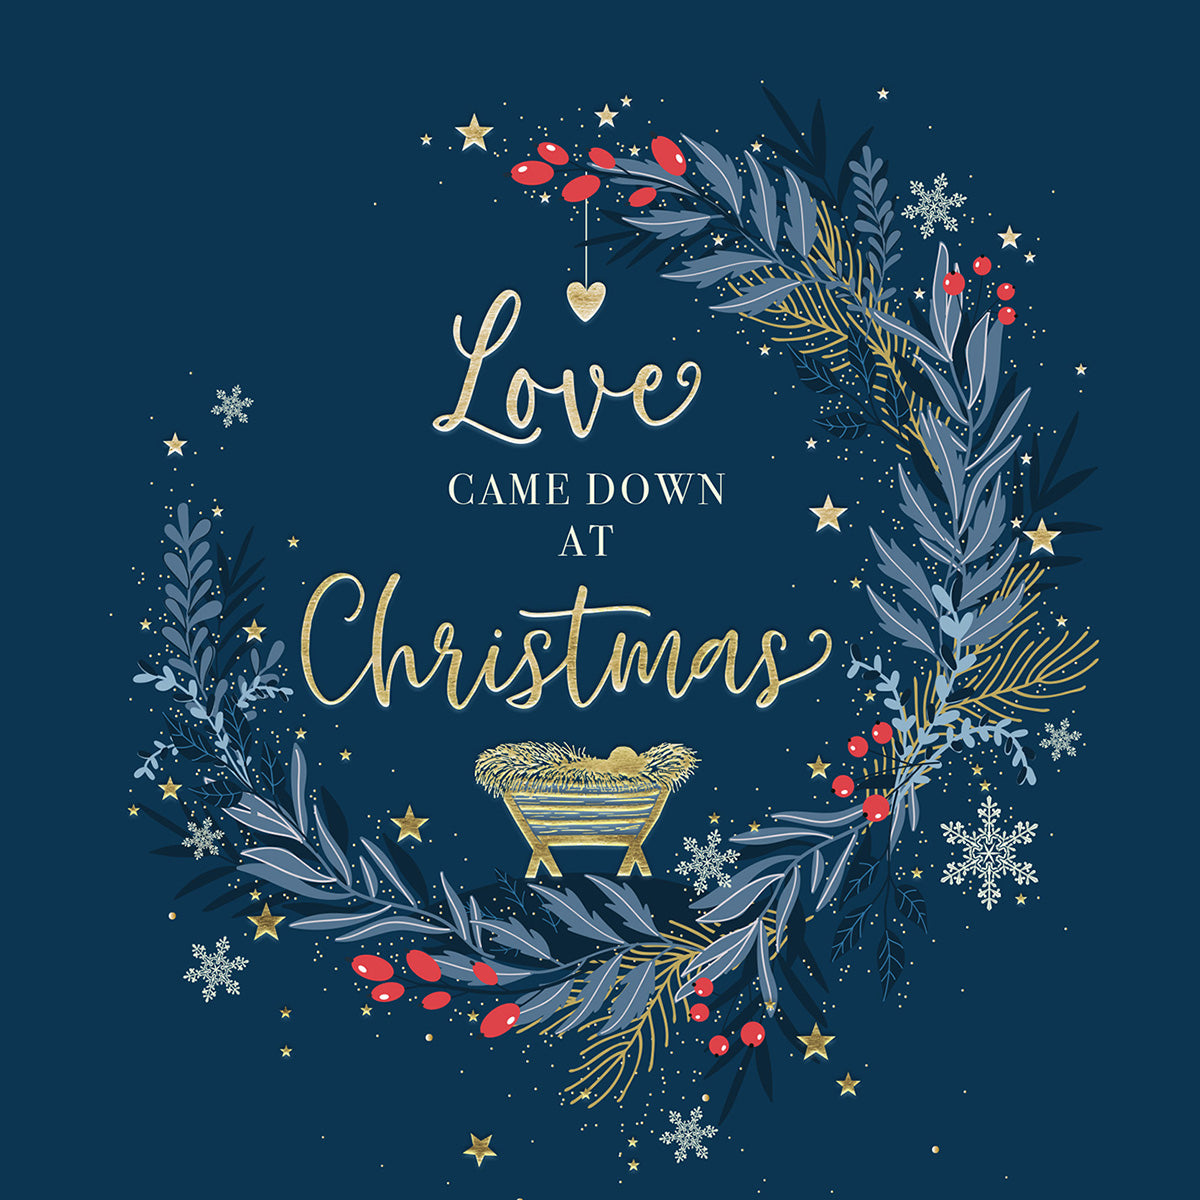 Compassion Christmas Card: Love Came Down (pack of 10) - The Christian Gift Company